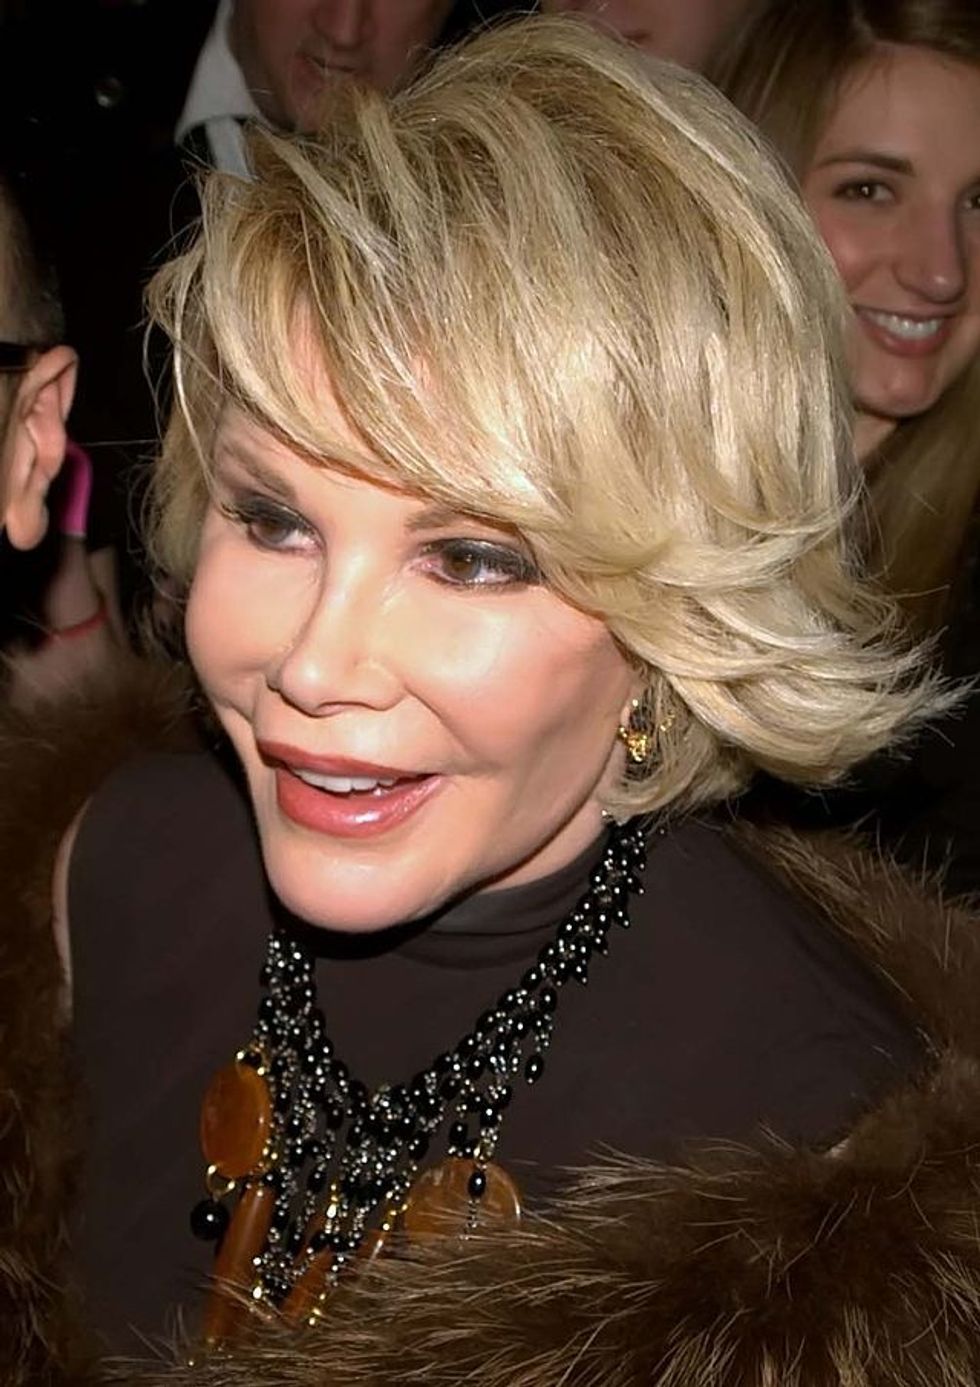 Joan Rivers Hospitalized In NYC, Reportedly In Critical Condition